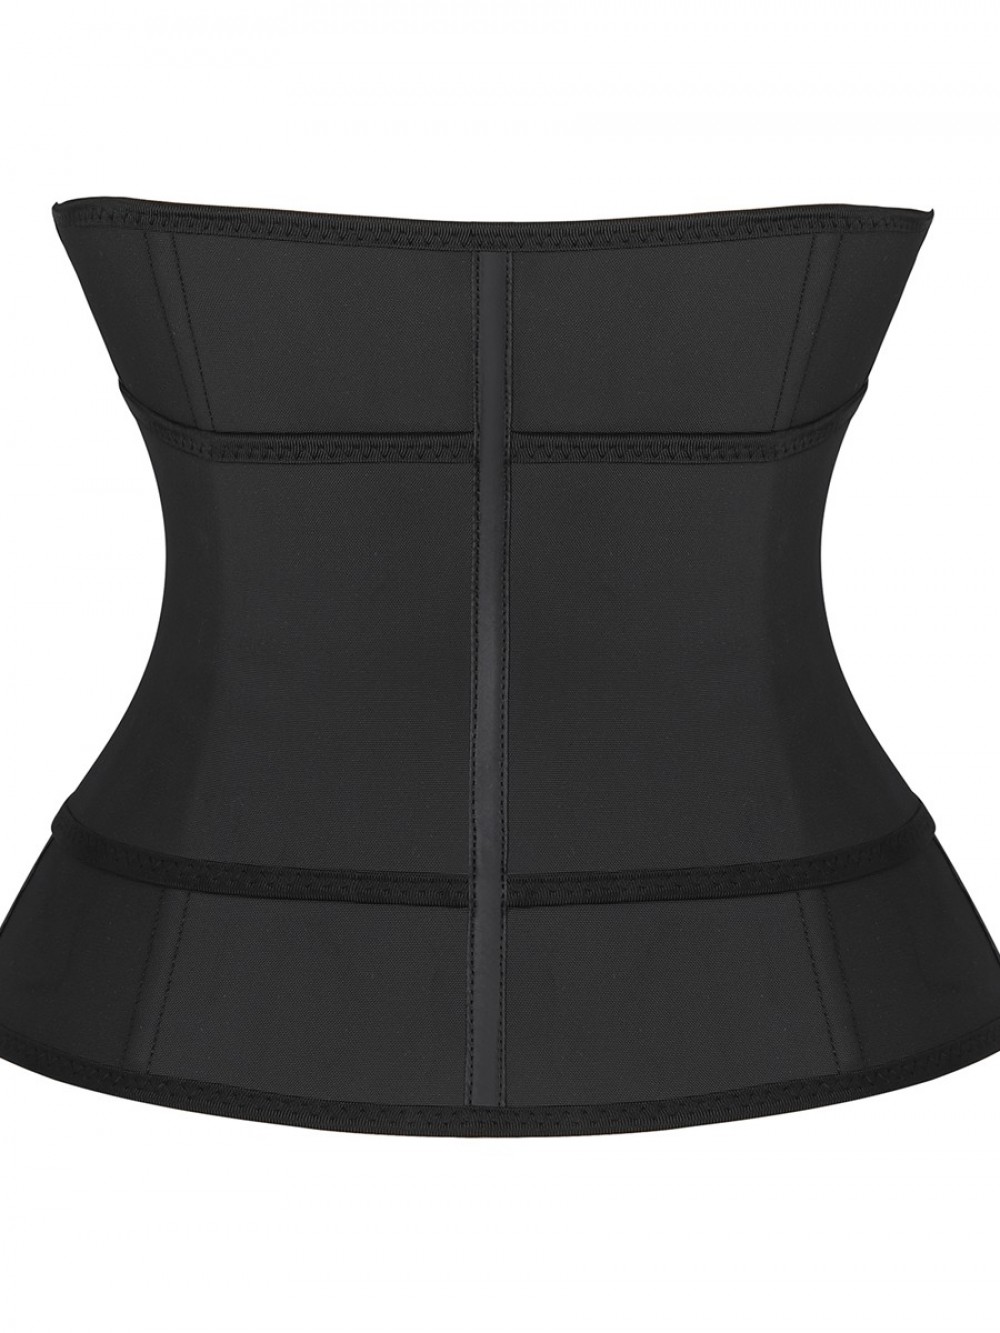 Black Bust Support Latex Waist Trainer With Belt Lose Weight